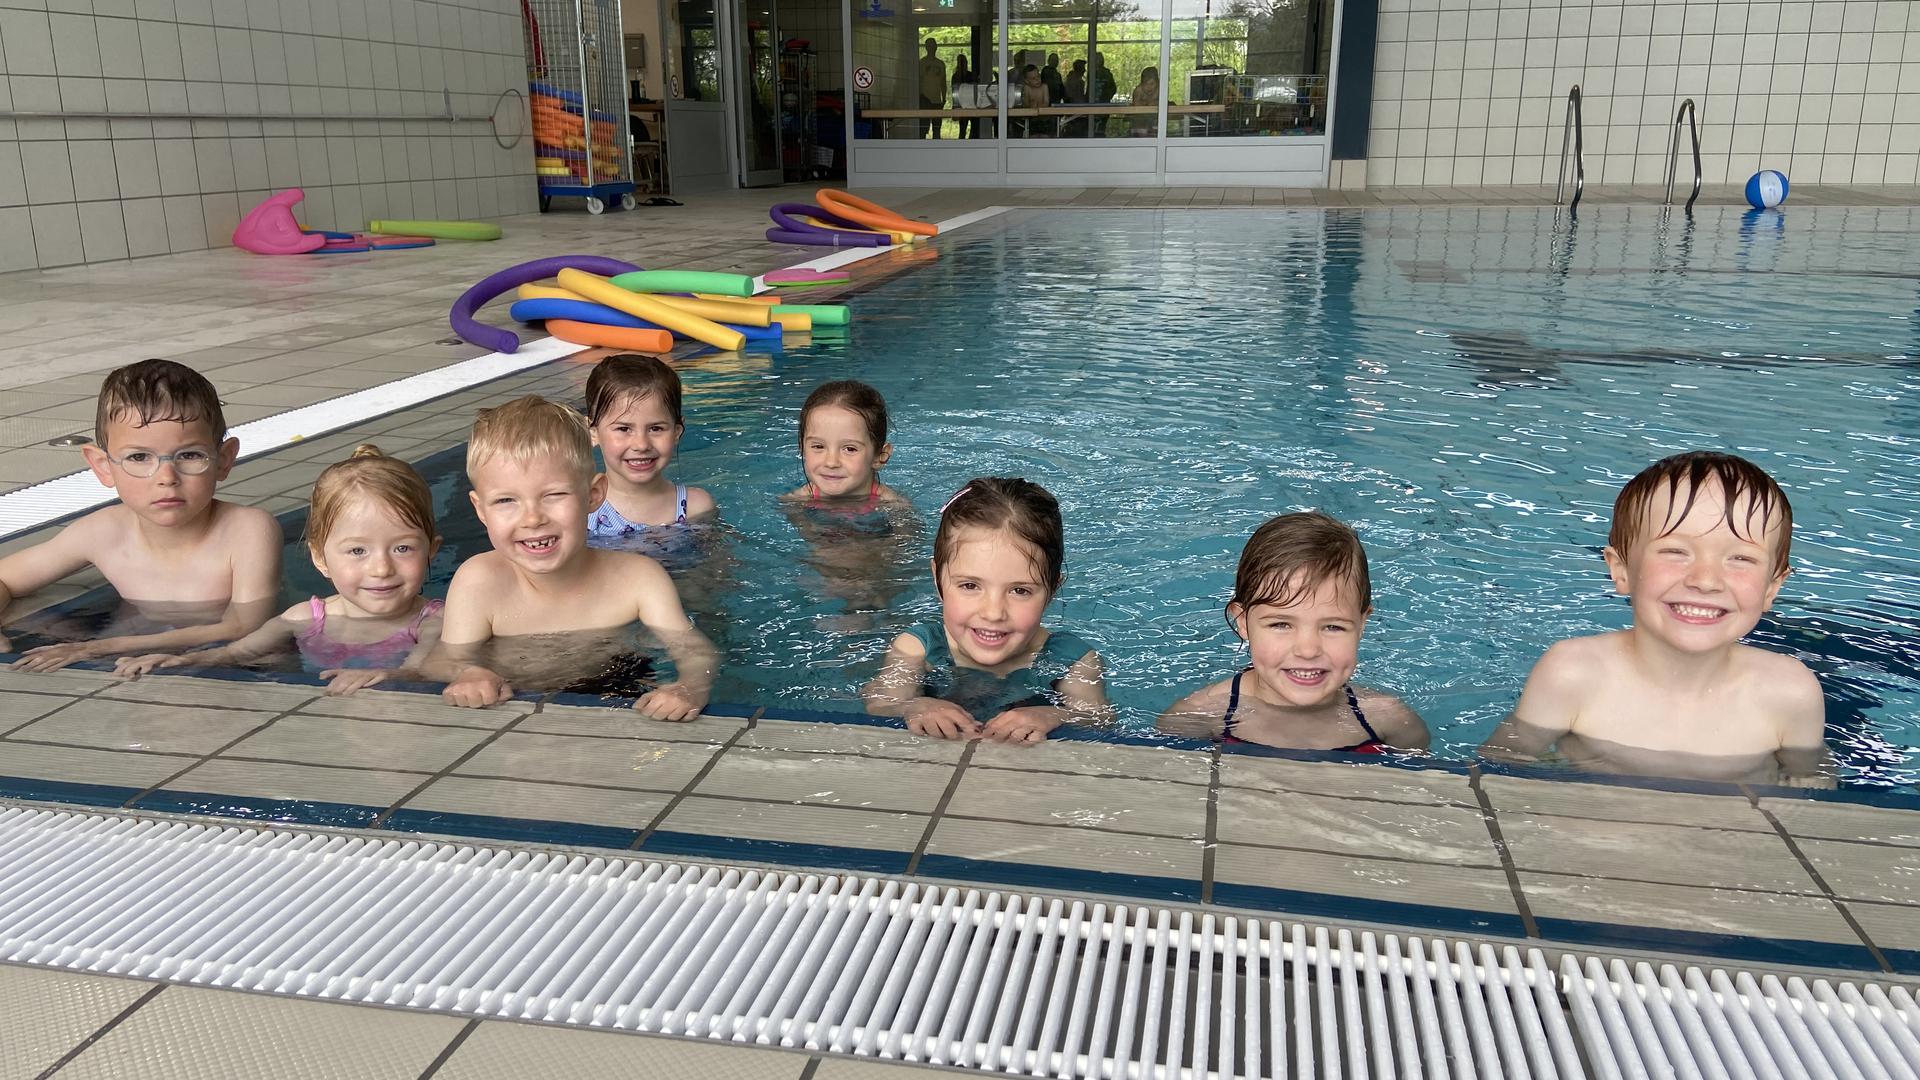 These children from Gondelsheim are currently learning to swim on the initiative of the mayor of Gondelsheim, Markus Rupp. 